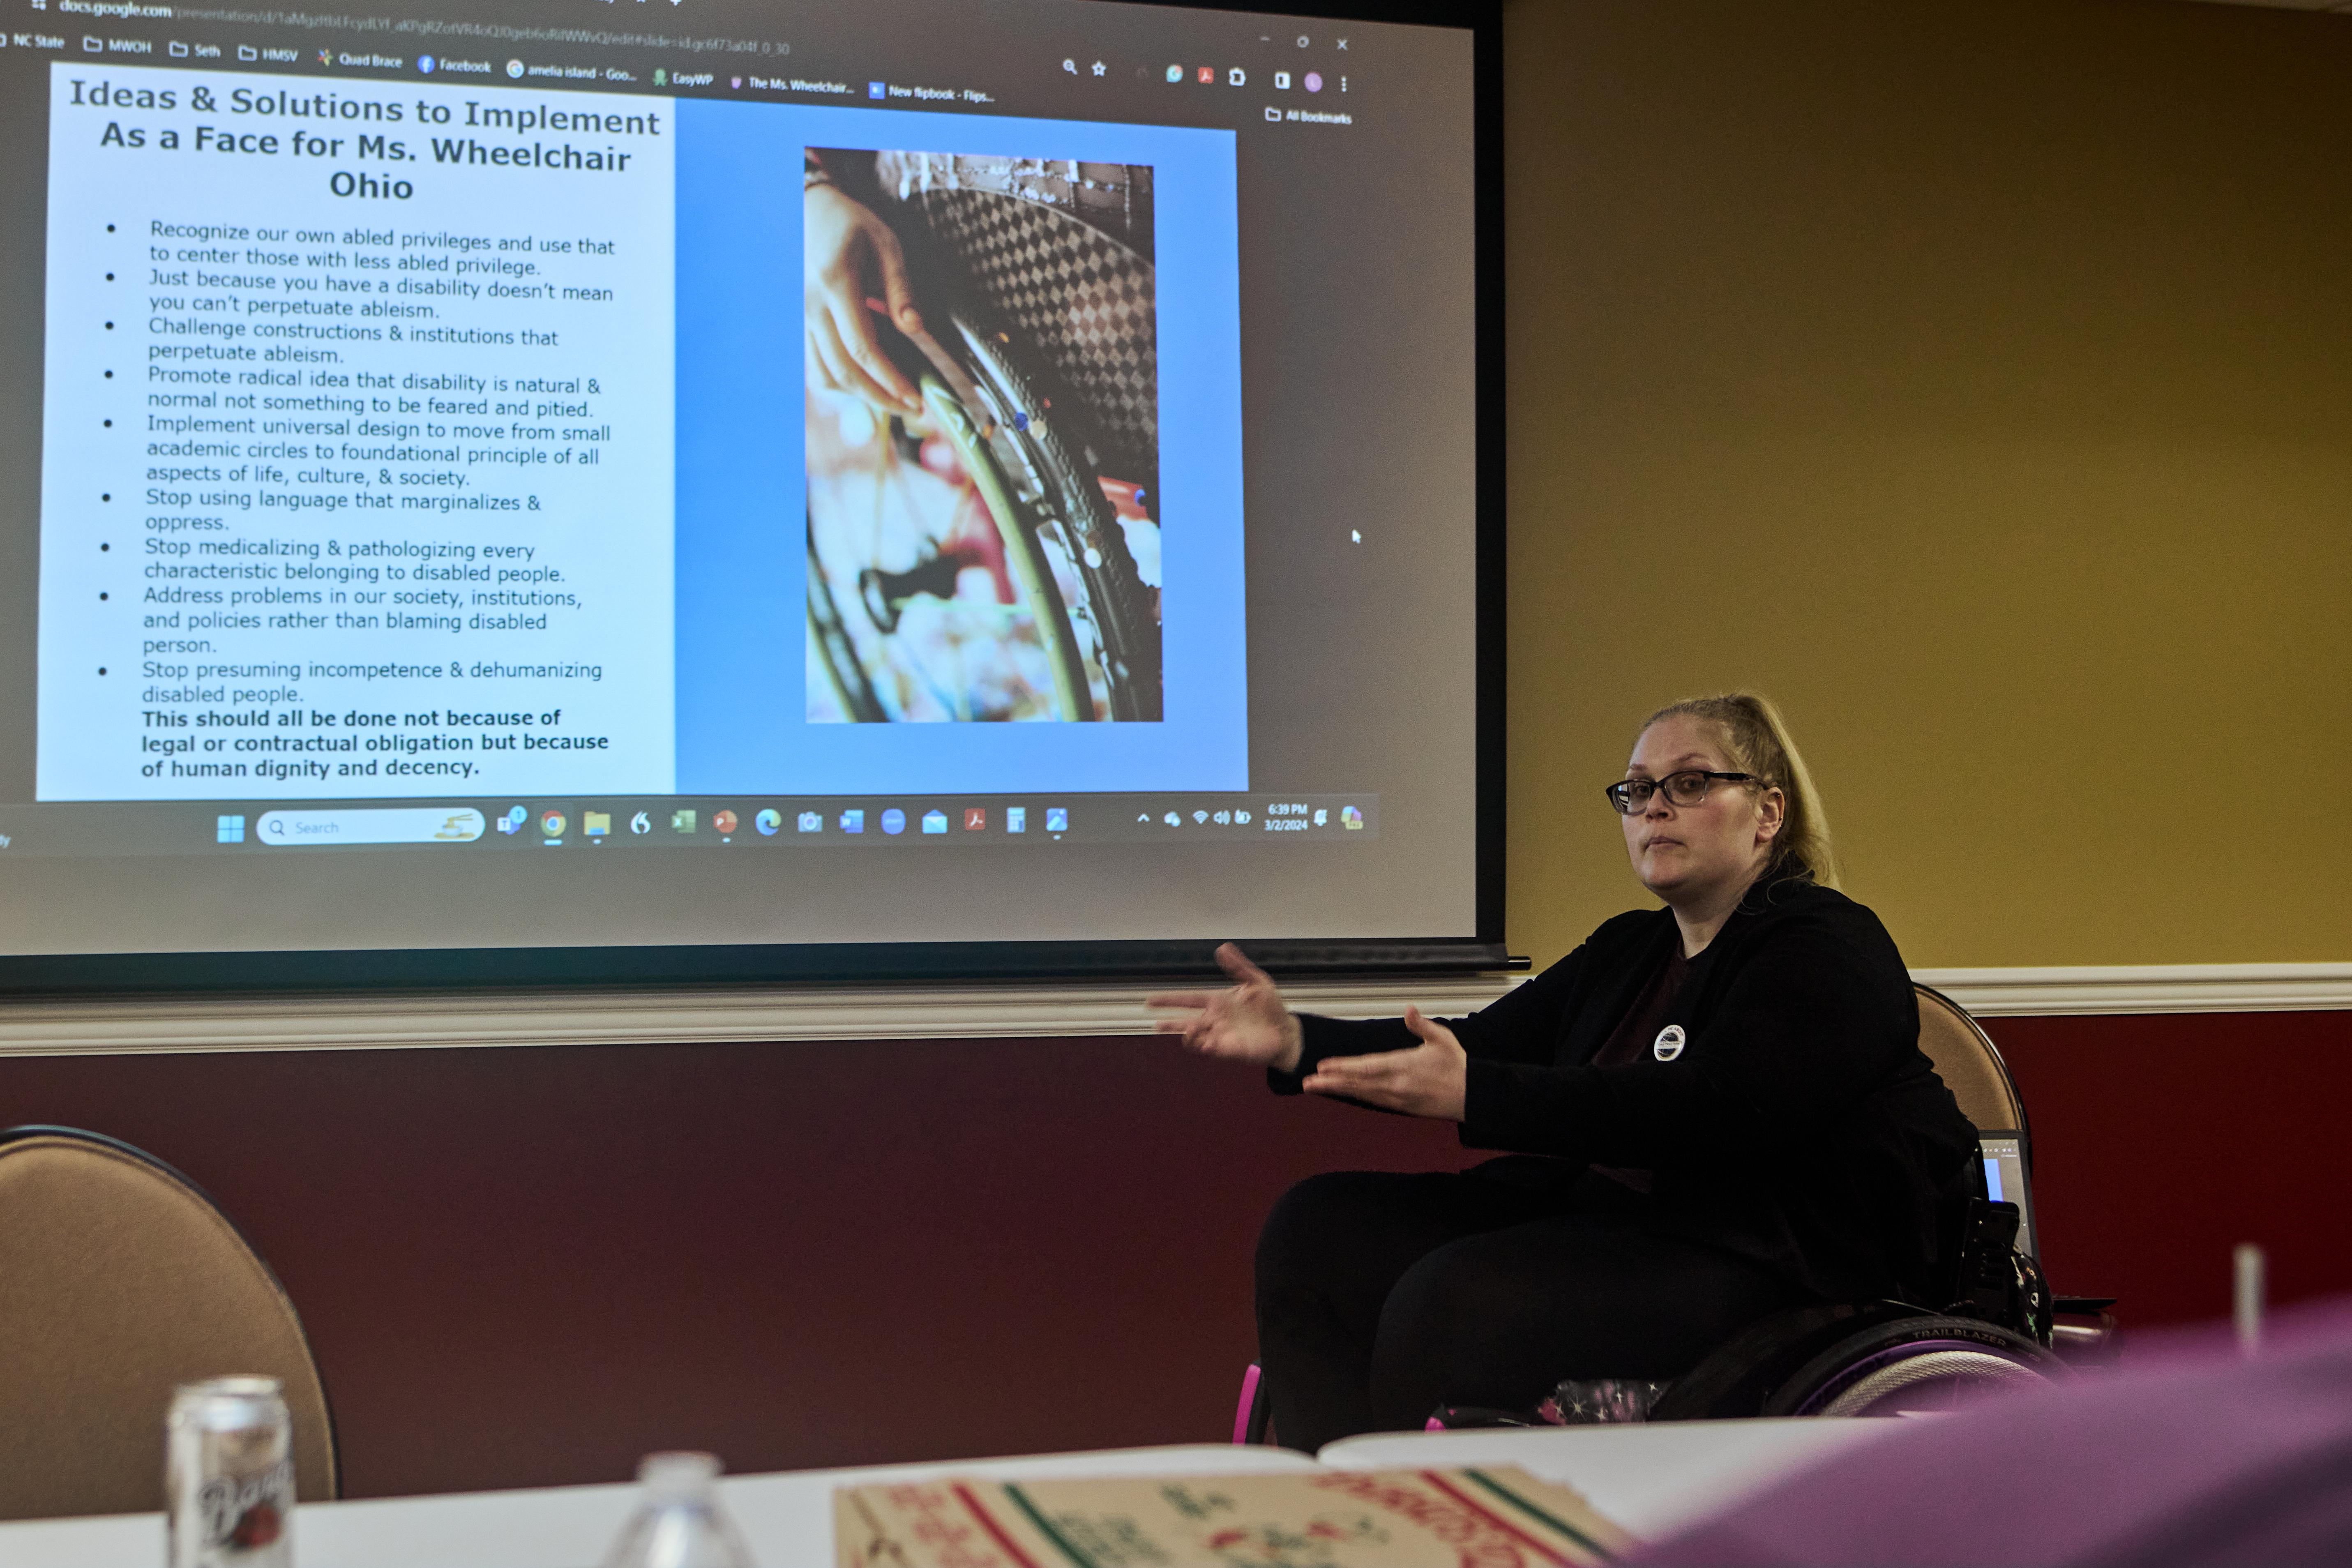 [Image description: Barb sitting in front of a screen projecting ideas to implement disability studies within Ms. Wheelchair Ohio.]